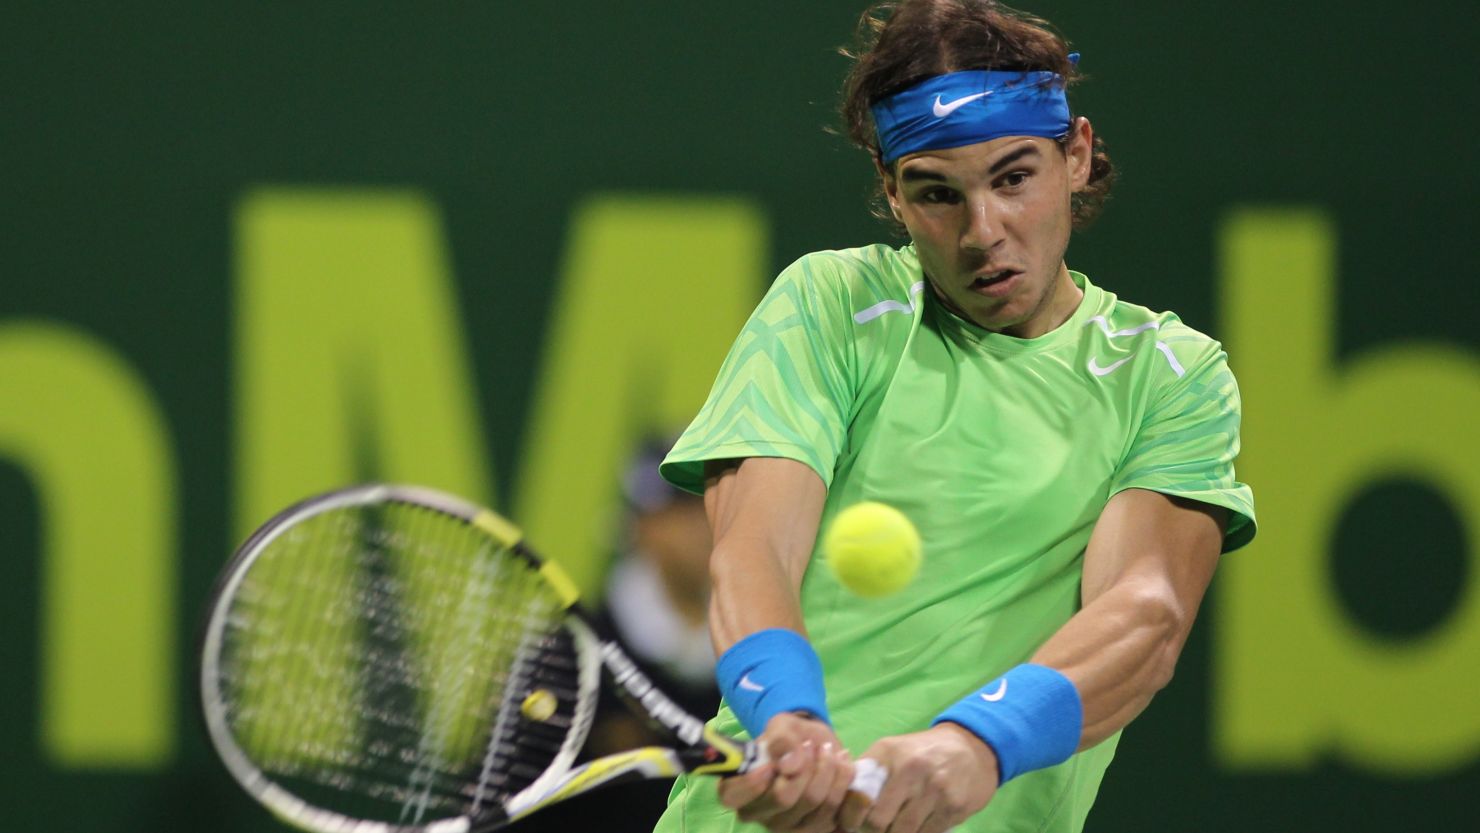 Rafael Nadal lost just four games as he reached the quarterfinals of the Qatar Open.